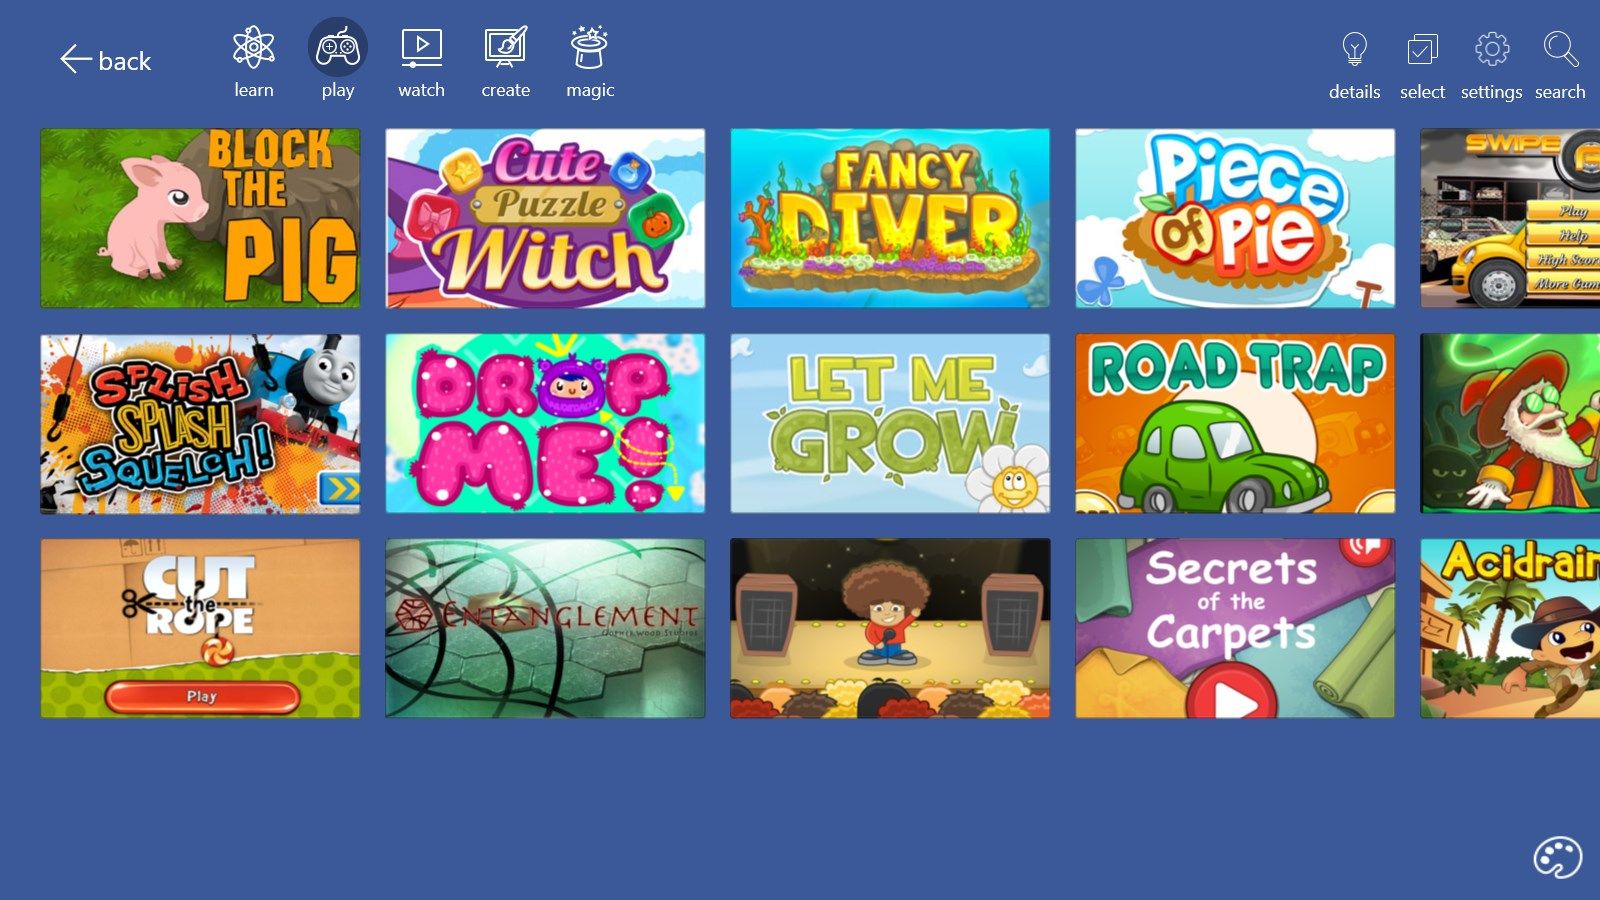 The content library has over 50,000 learning activities, videos and games from established publishers.